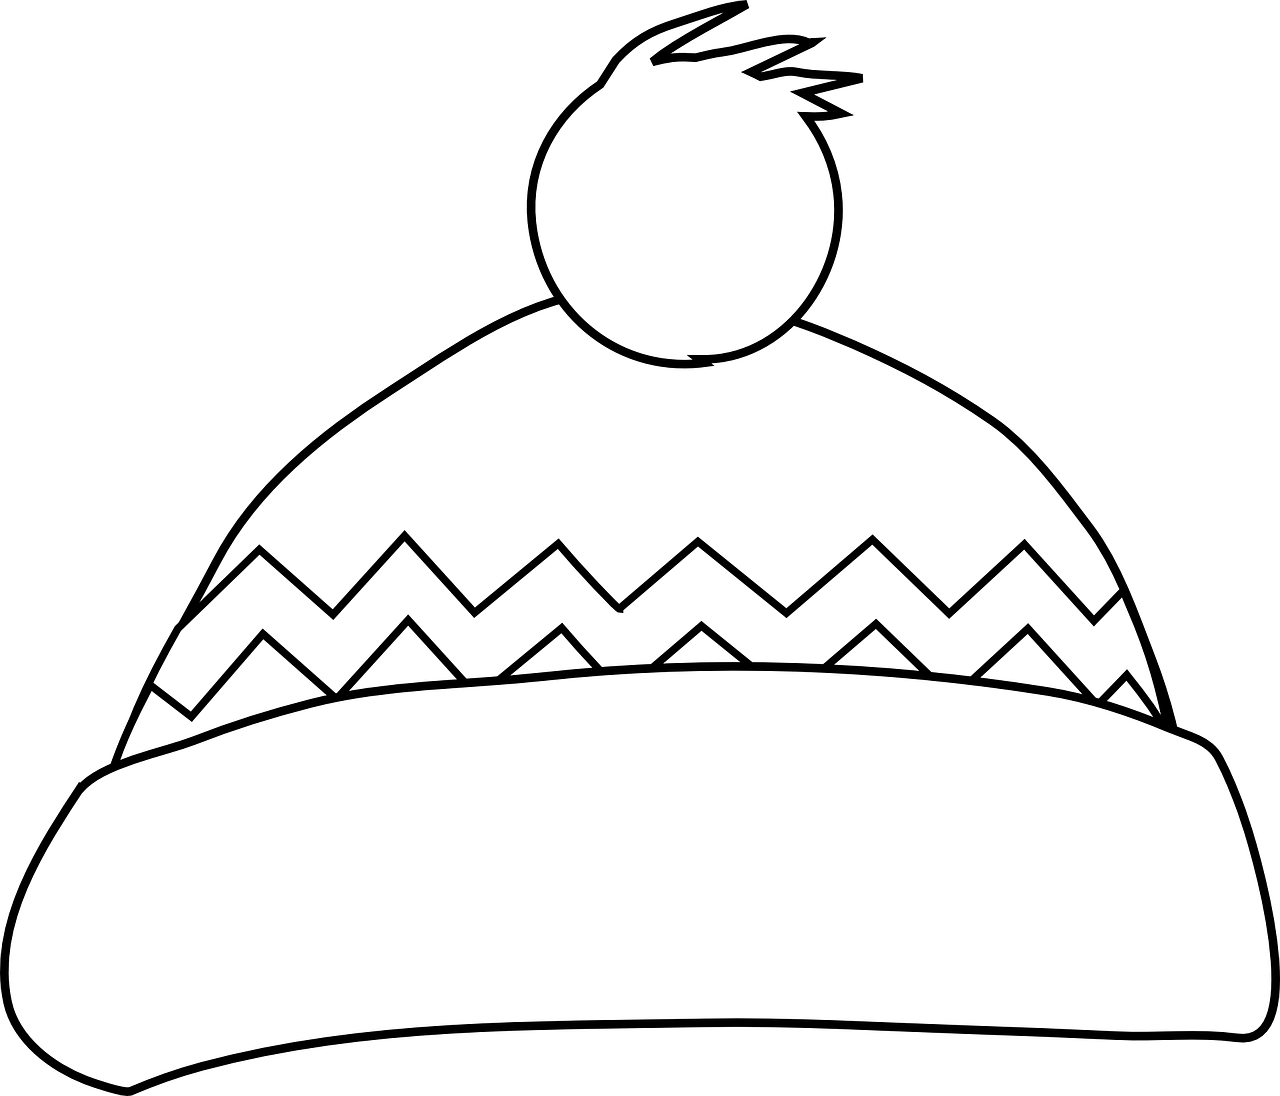 Gloves clipart hat wooly. Winter clothing colouring pages